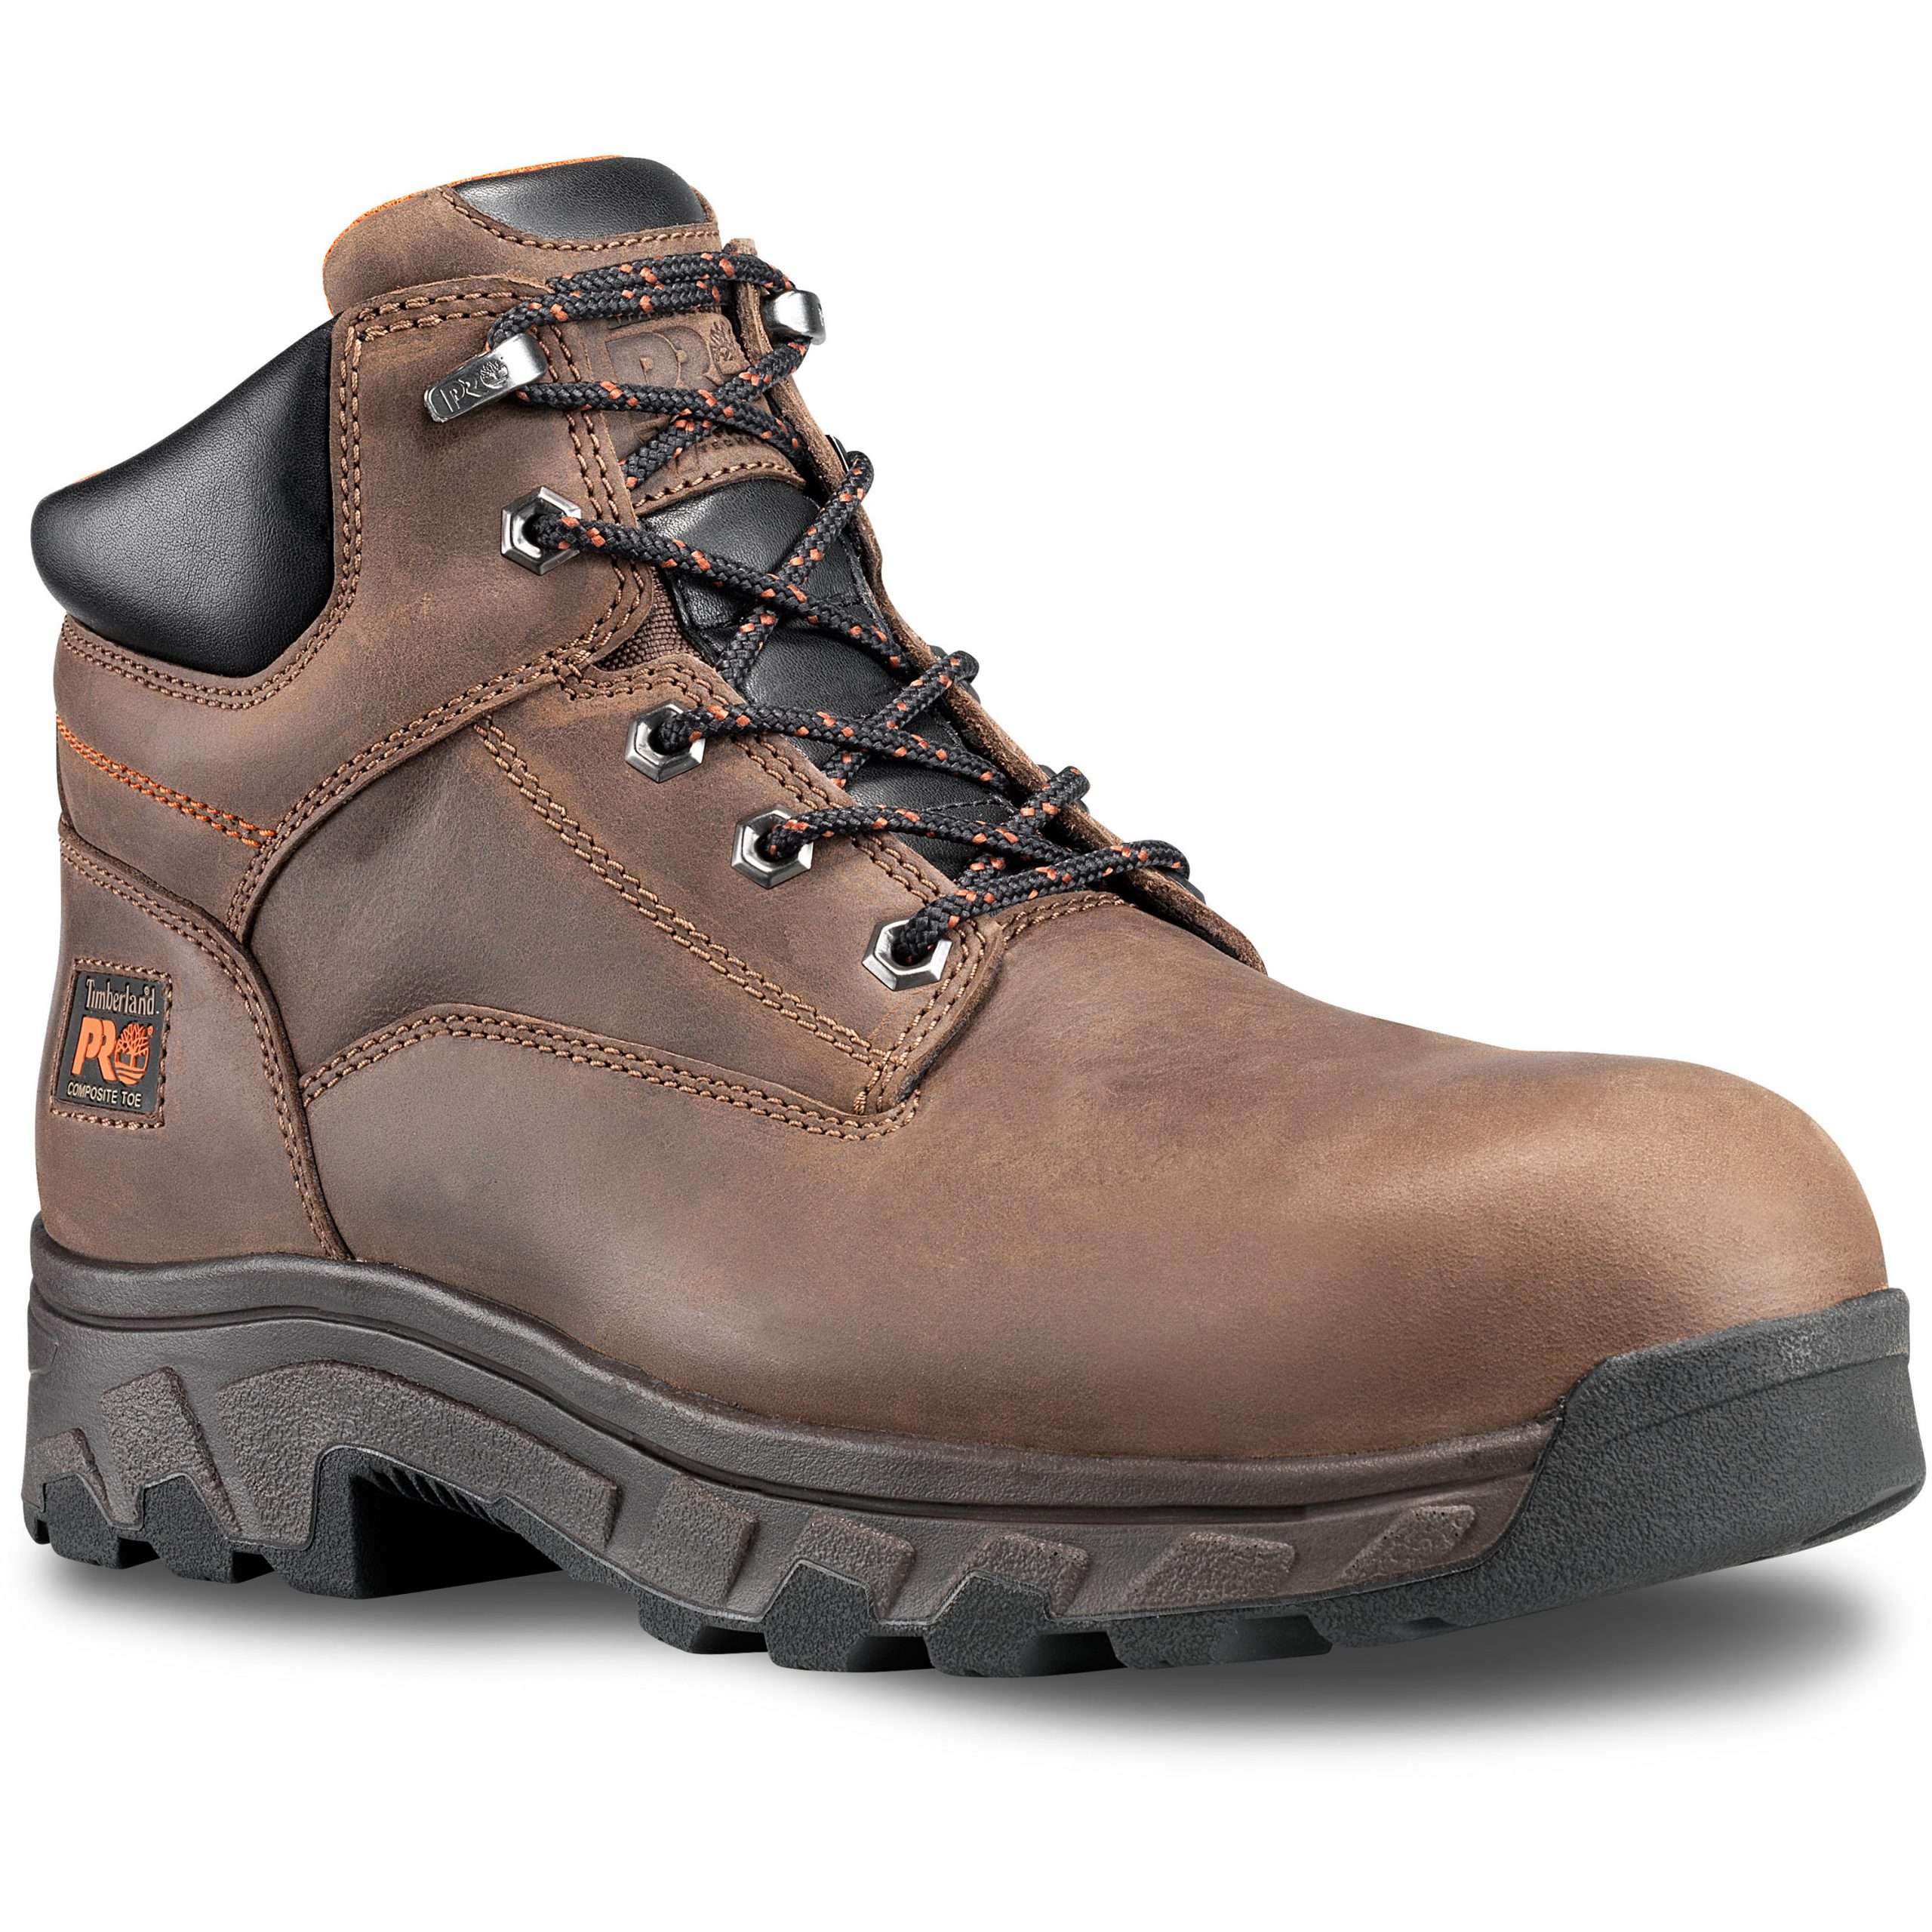 Timberland Pro Composite Toe Work Boot